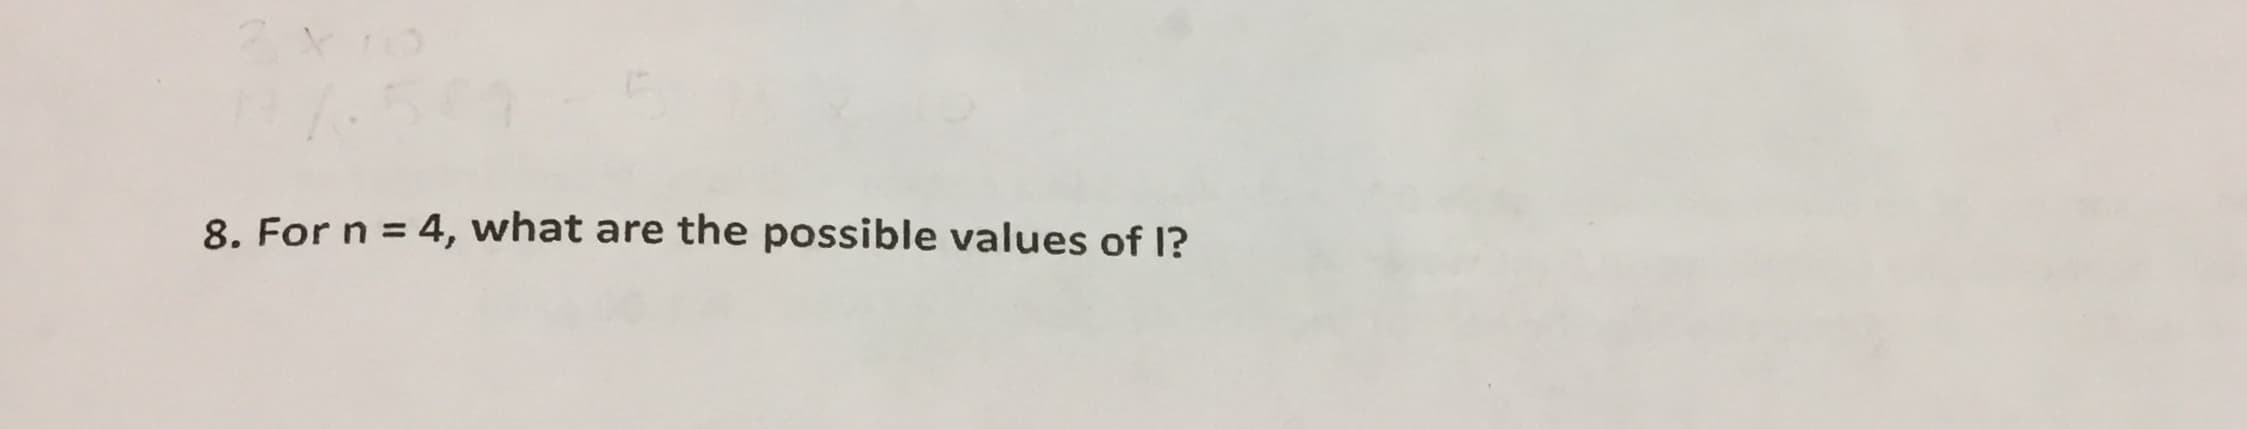 8. For n = 4, what are the possible values of I?
